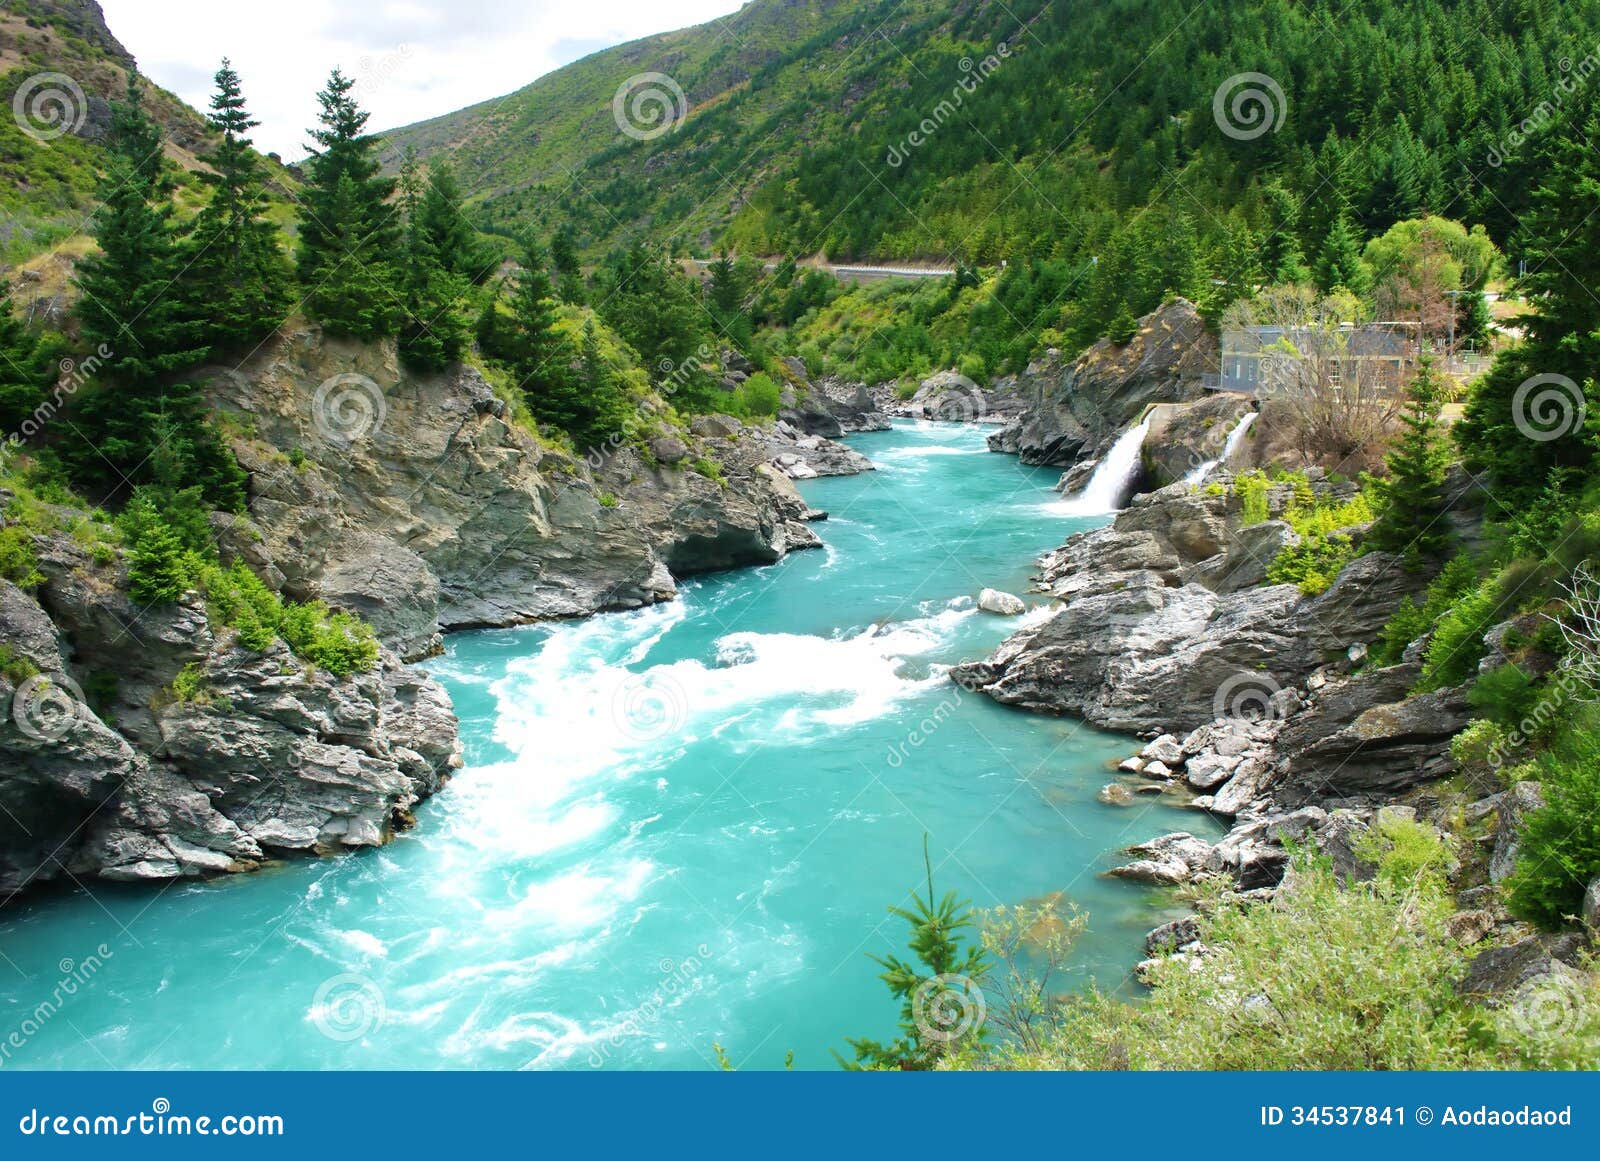 Kawarau river and forest stock image. Image of river - 34537841